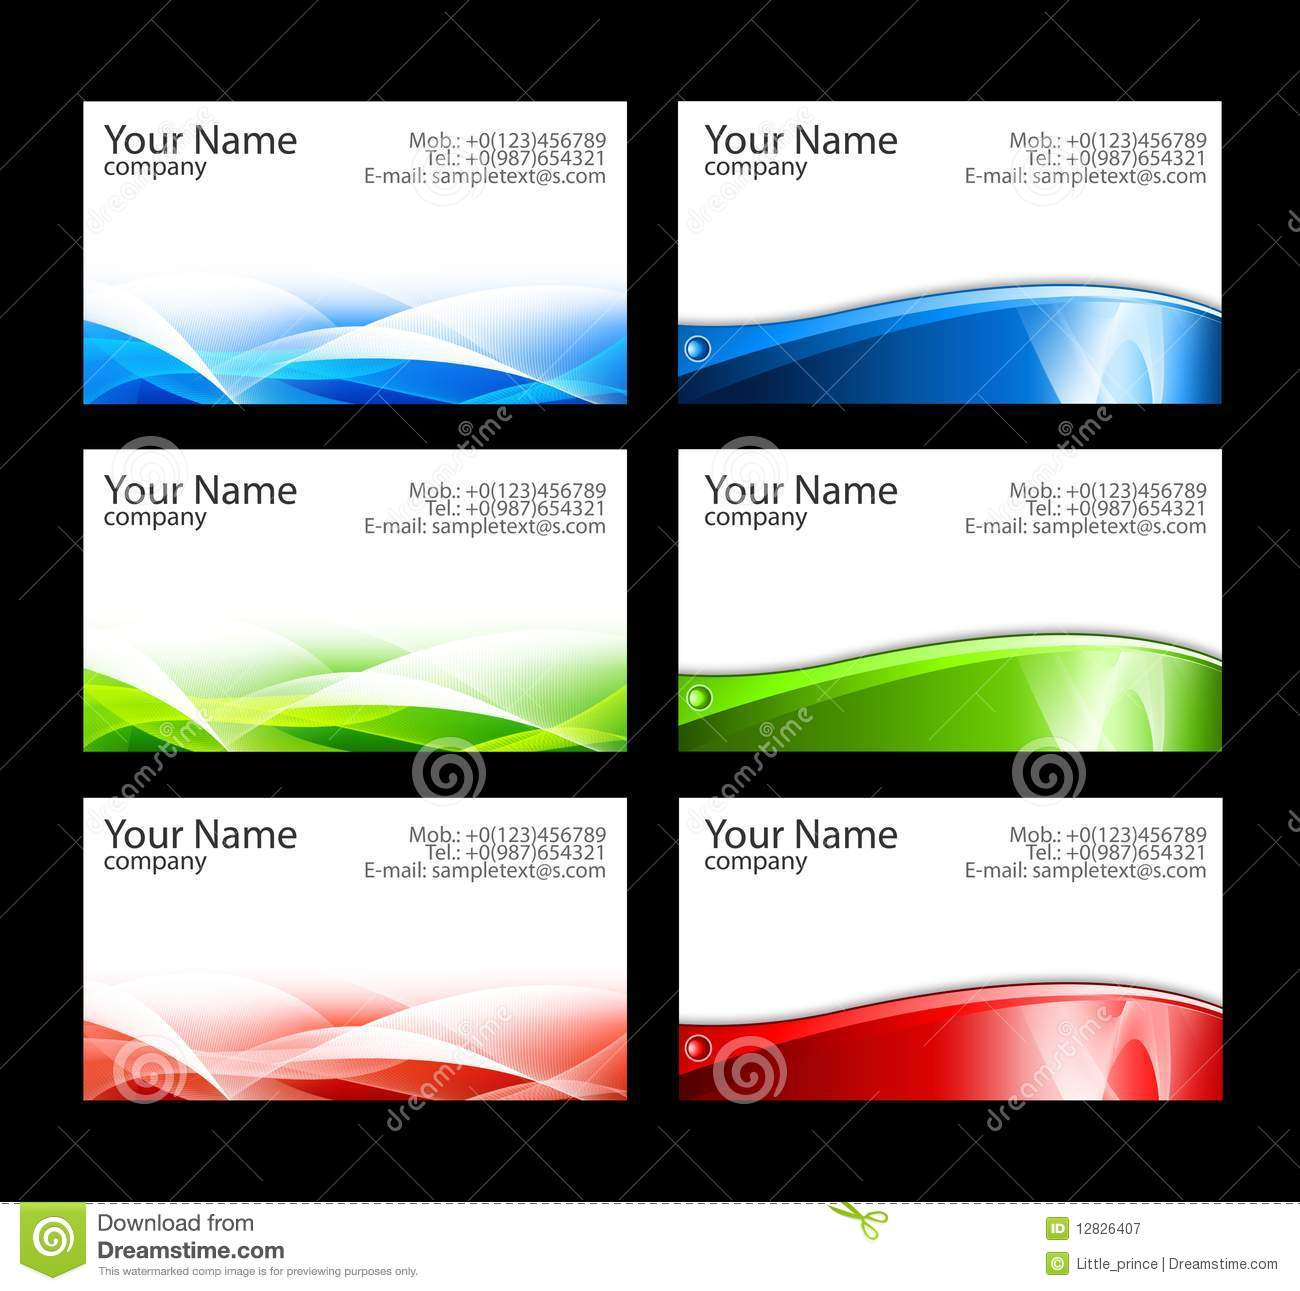 15 Free Avery Business Card Templates Images – Free Business With Regard To Free Complimentary Card Templates